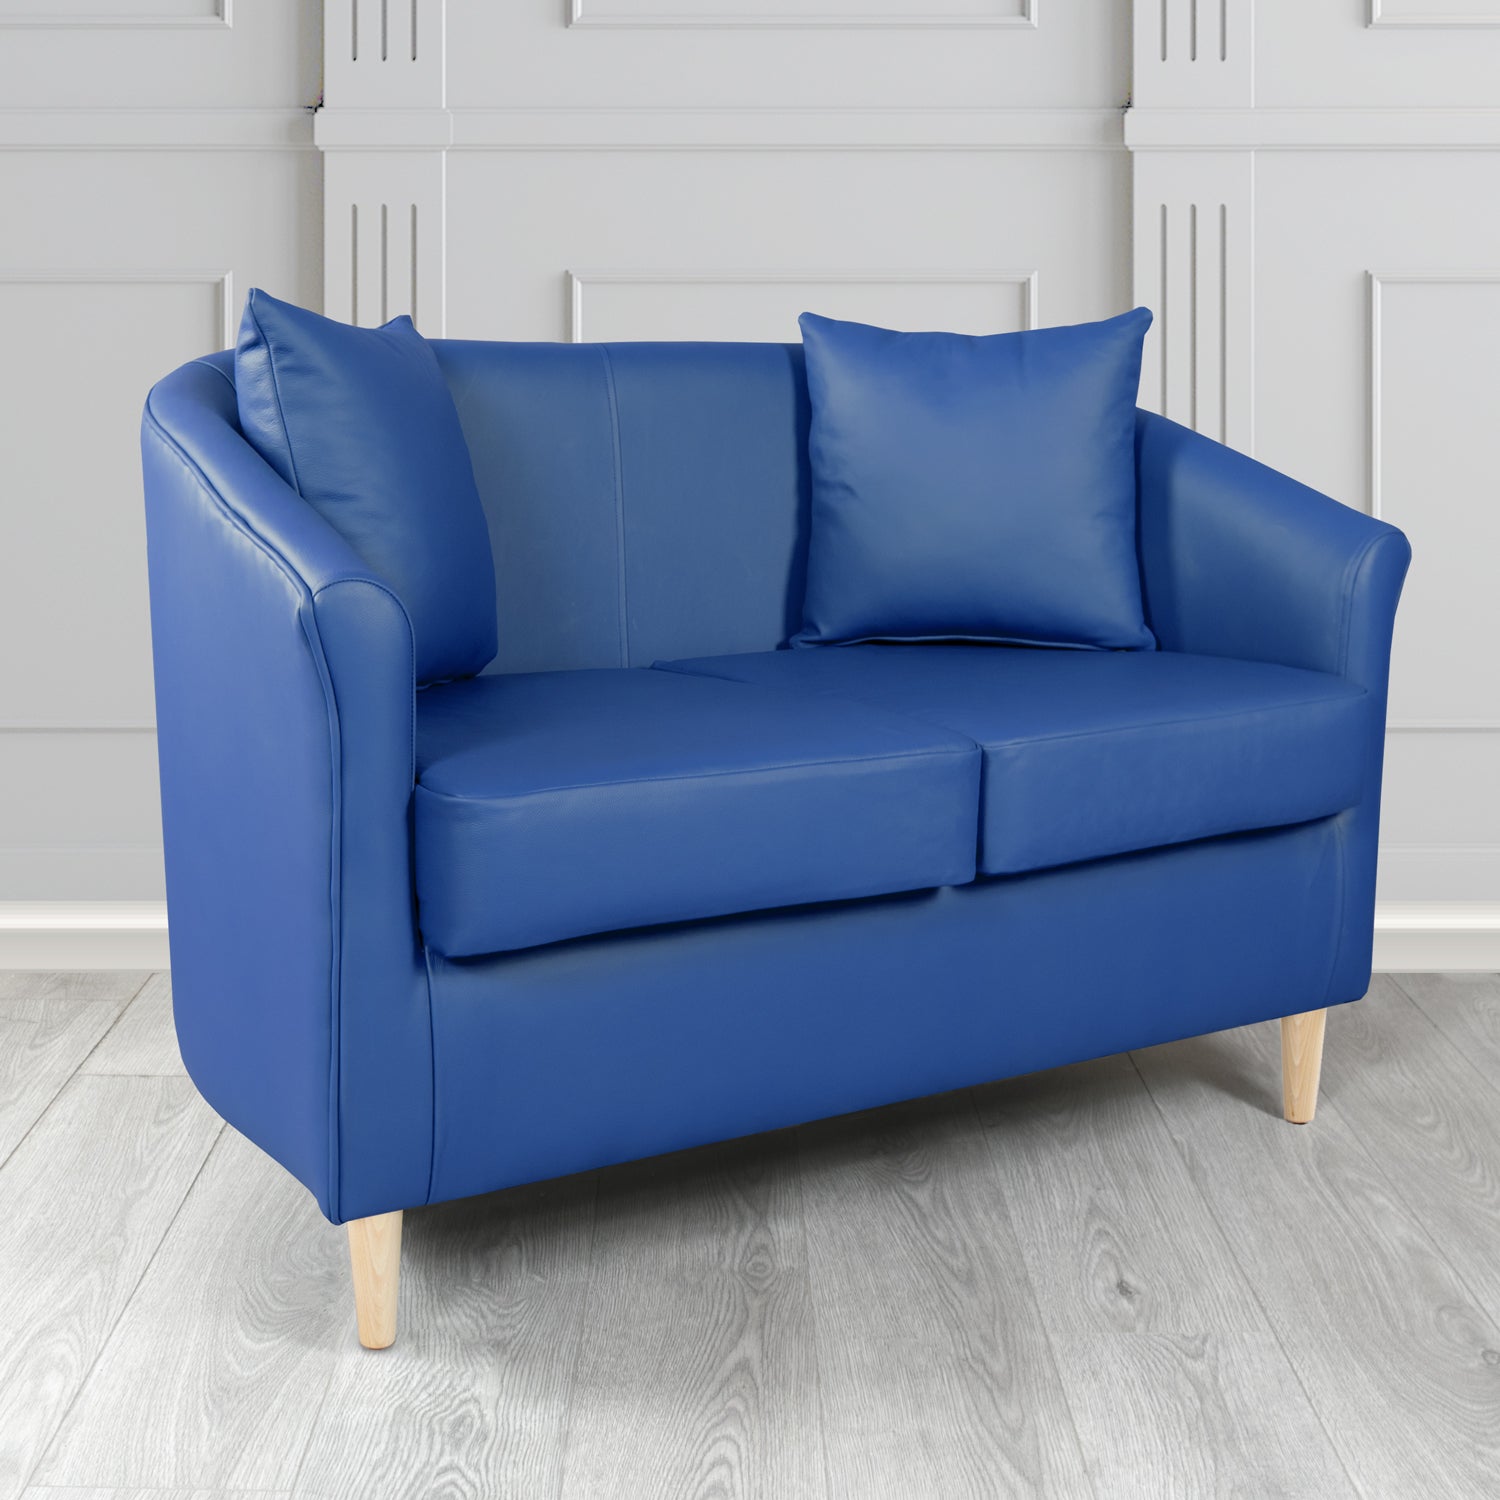 St Tropez Shelly Deep Ultramarine Crib 5 Genuine Leather 2 Seater Tub Sofa with Scatter Cushions - The Tub Chair Shop